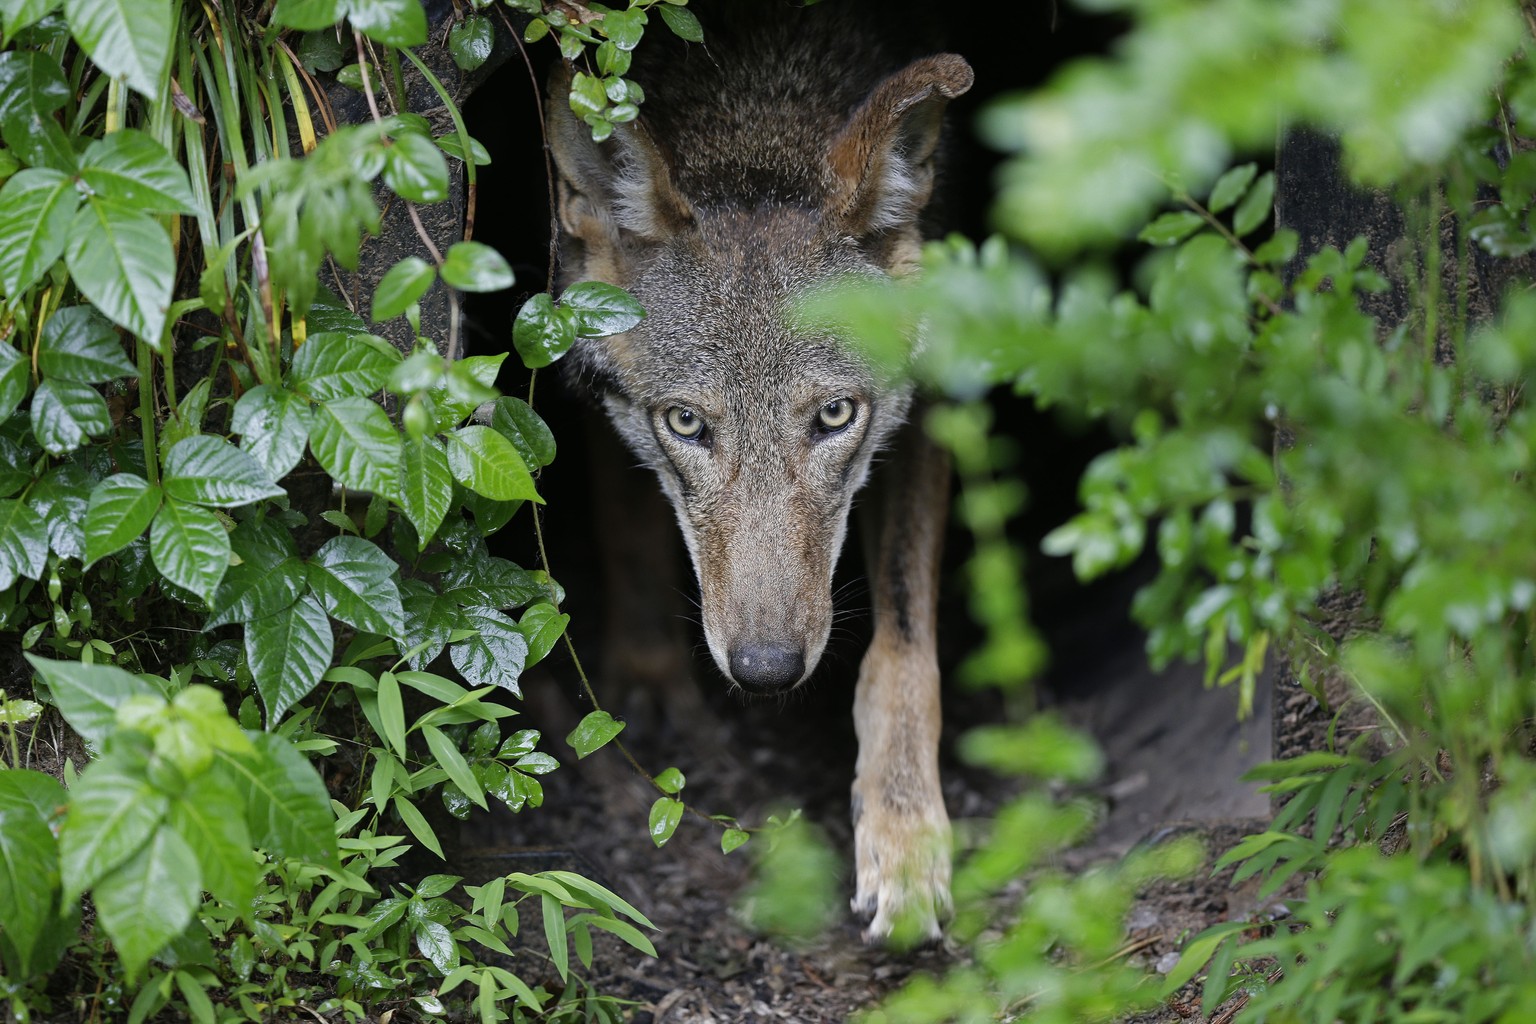 FILE - A female red wolf emerges from her den sheltering newborn pups at the Museum of Life and Science in Durham, N.C., on May 13, 2019. On Wednesday, Aug. 9, 2023, the U.S. government agreed to sett ...